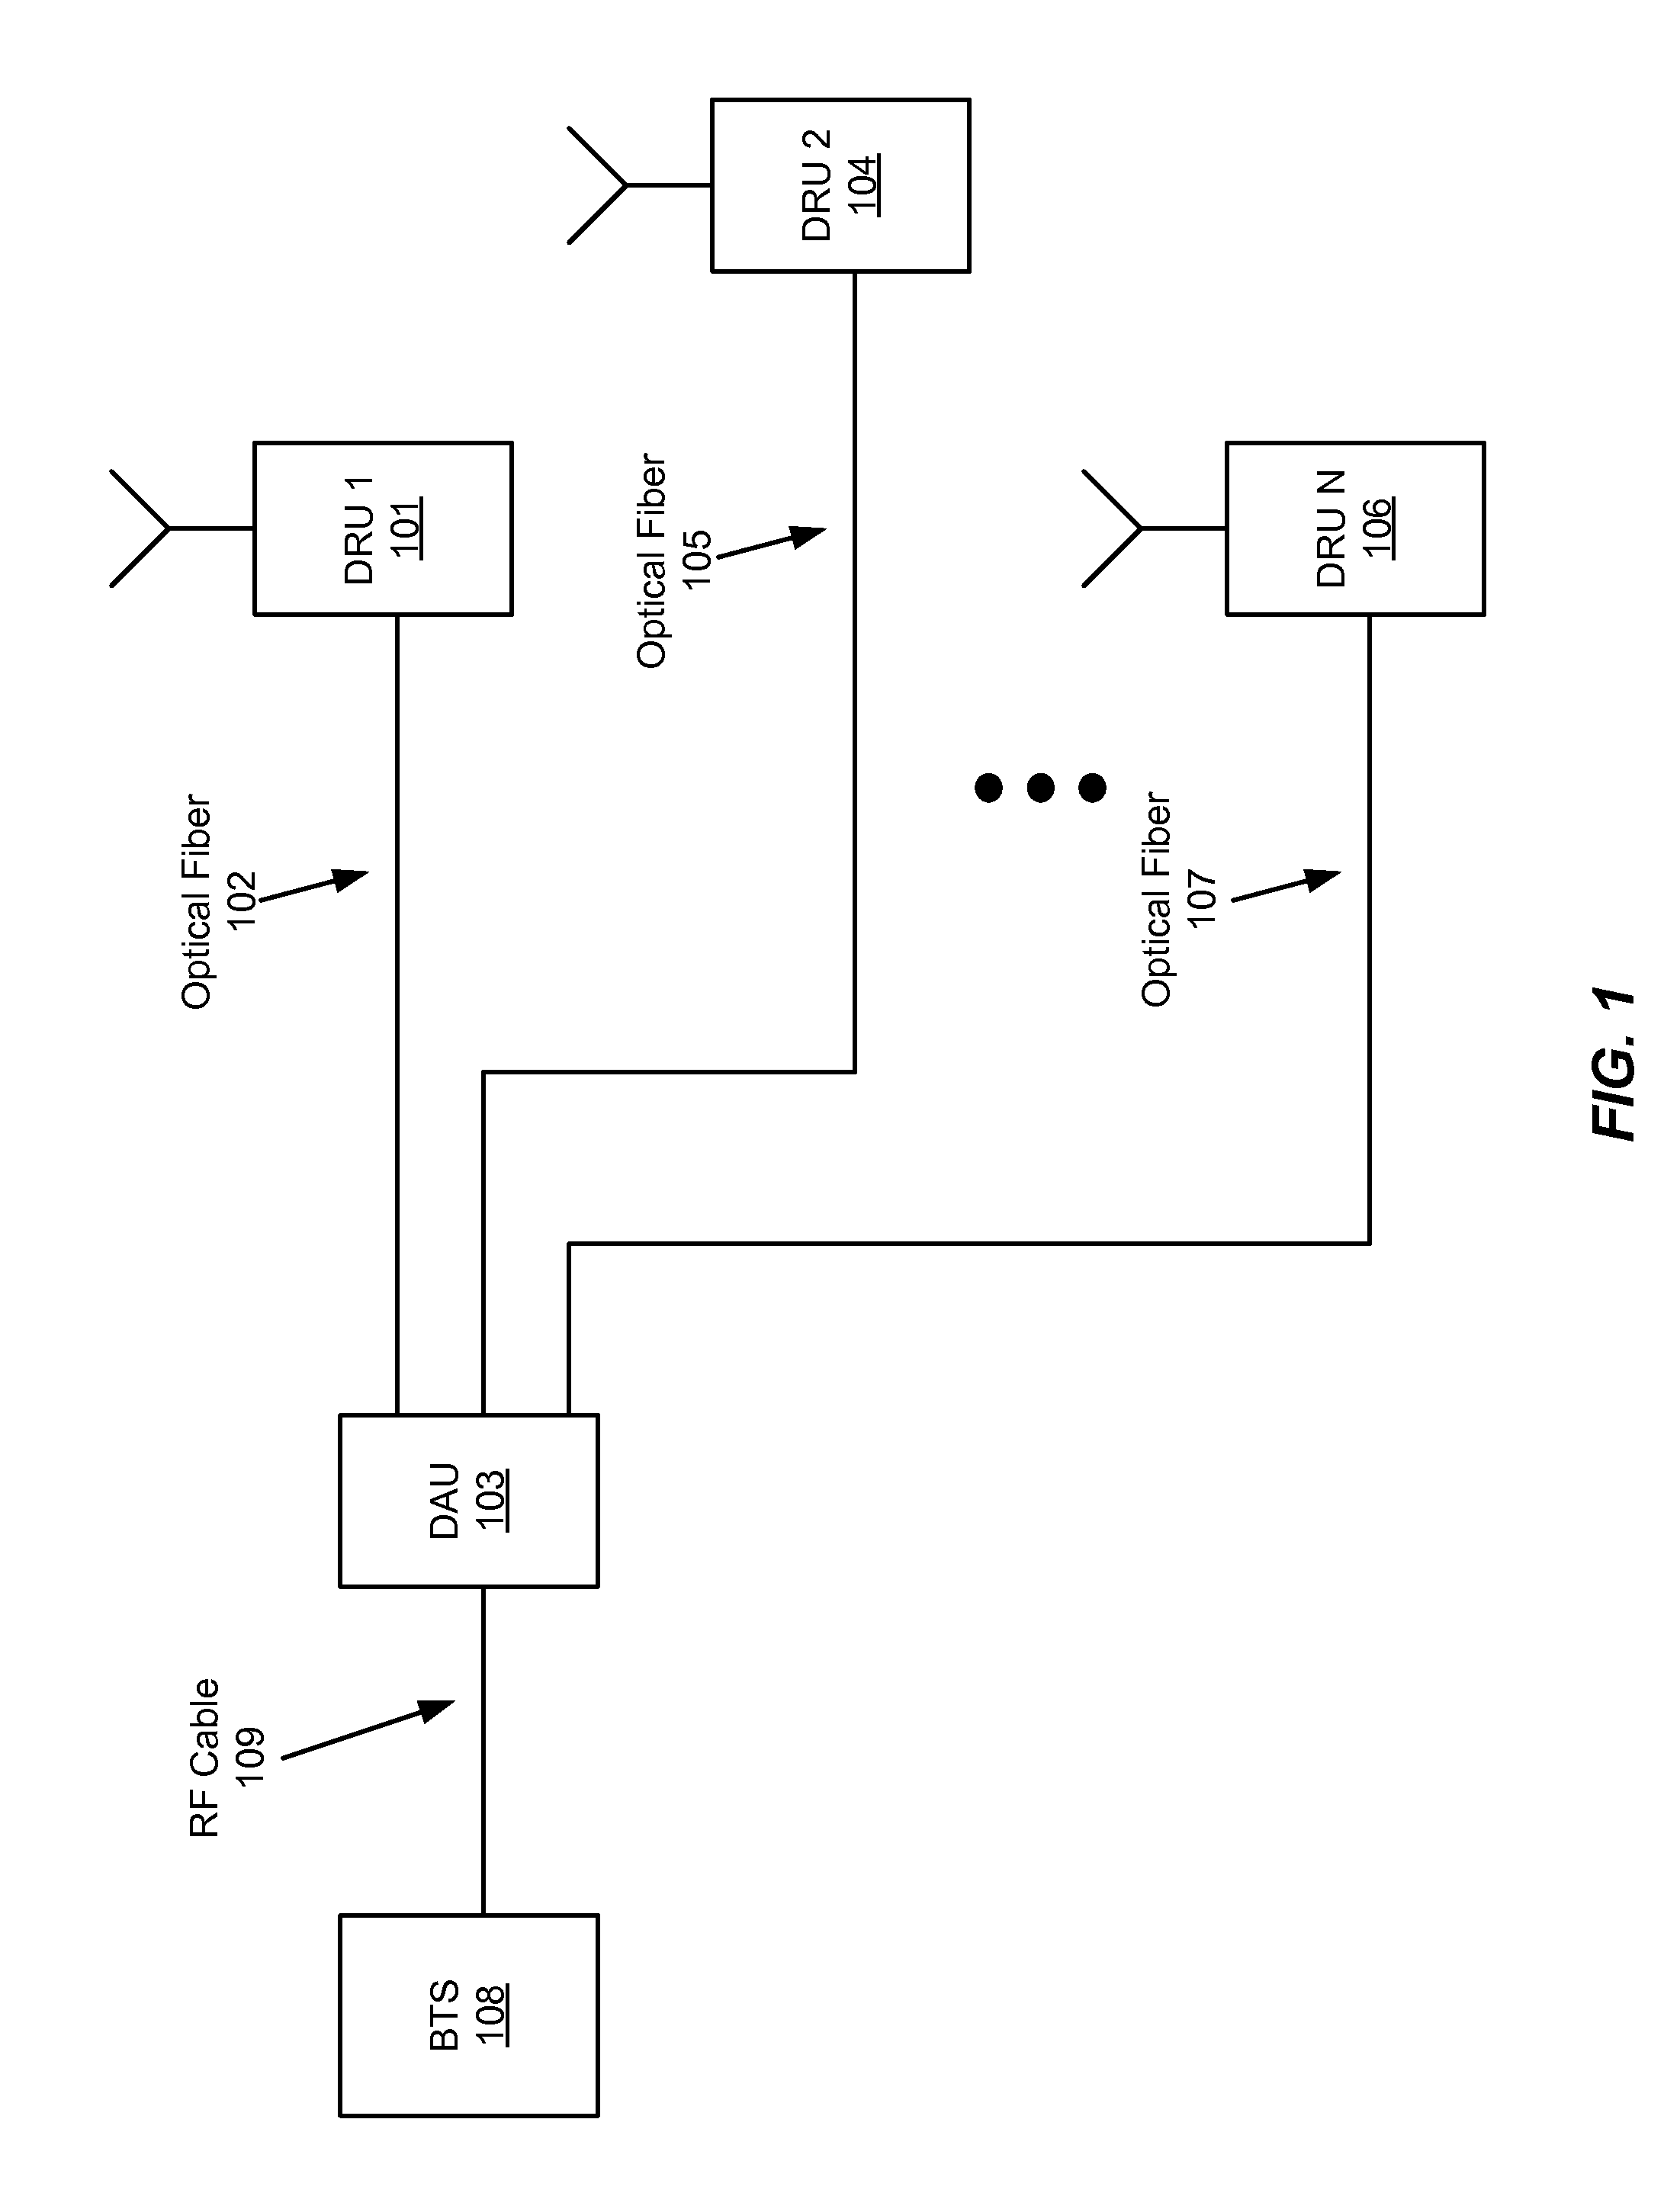 Network switch for a distributed antenna network